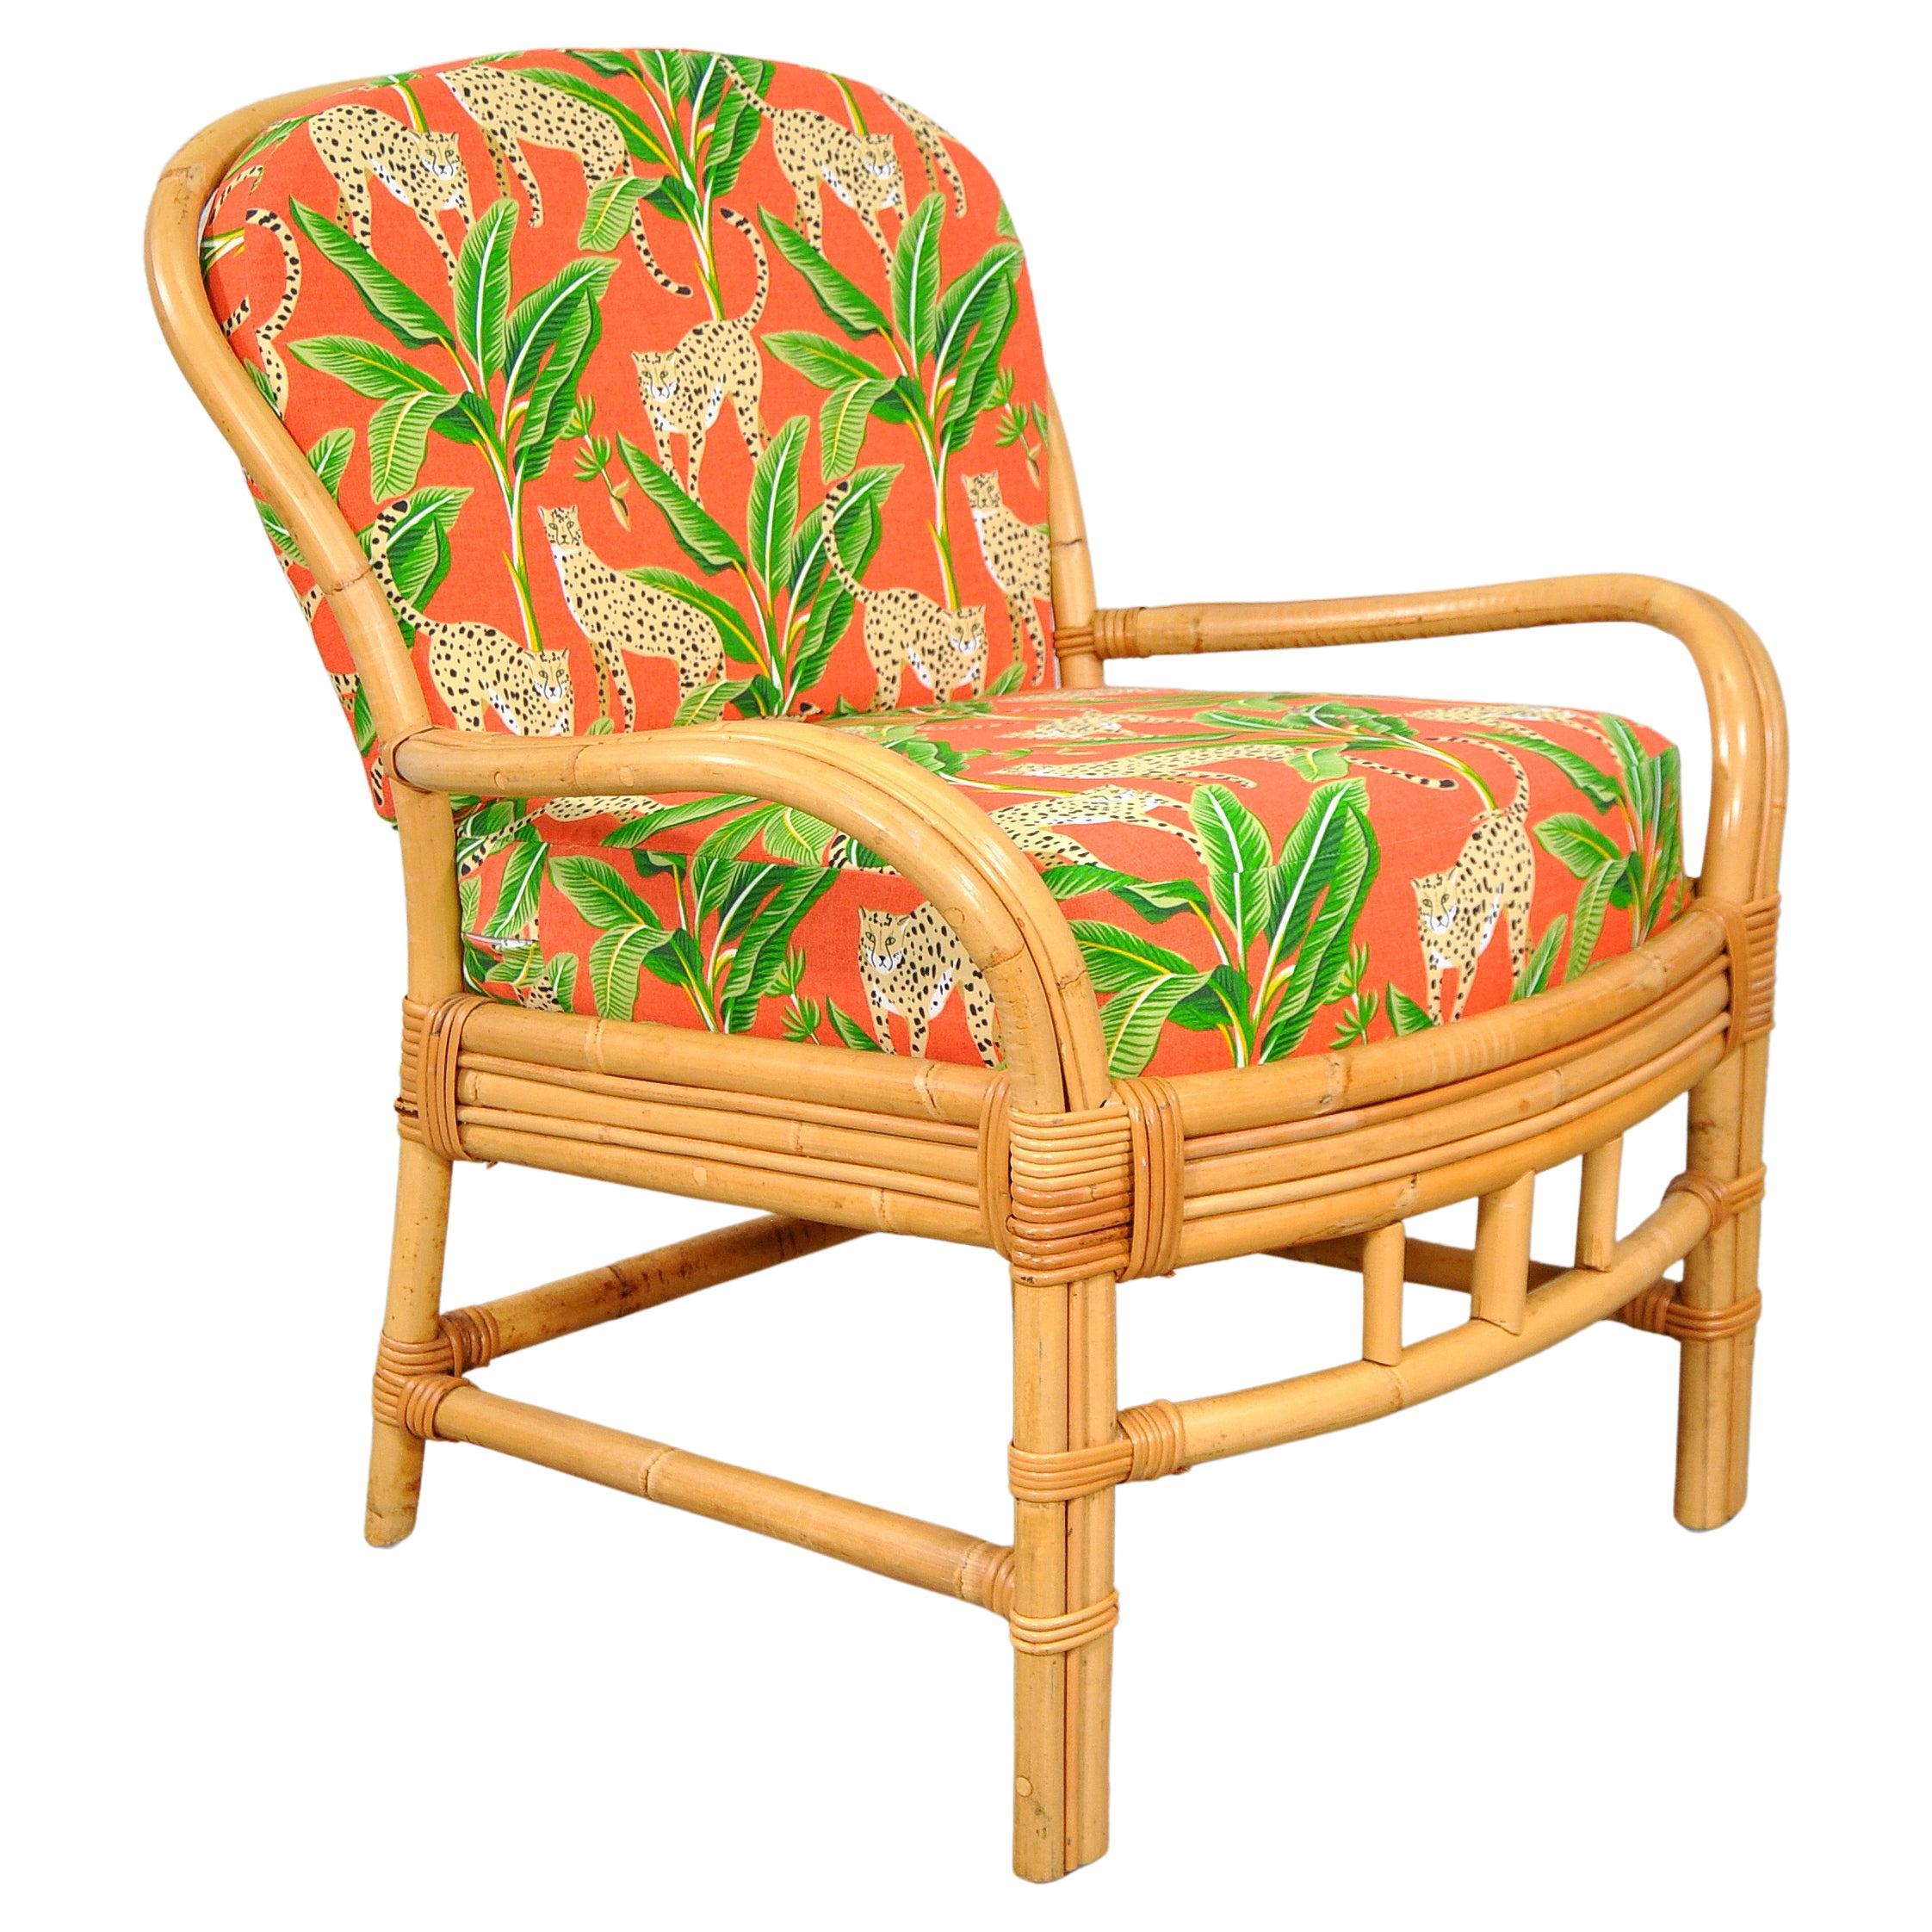 Rattan Chair with Tropical Cheetah and Palm Fabric For Sale